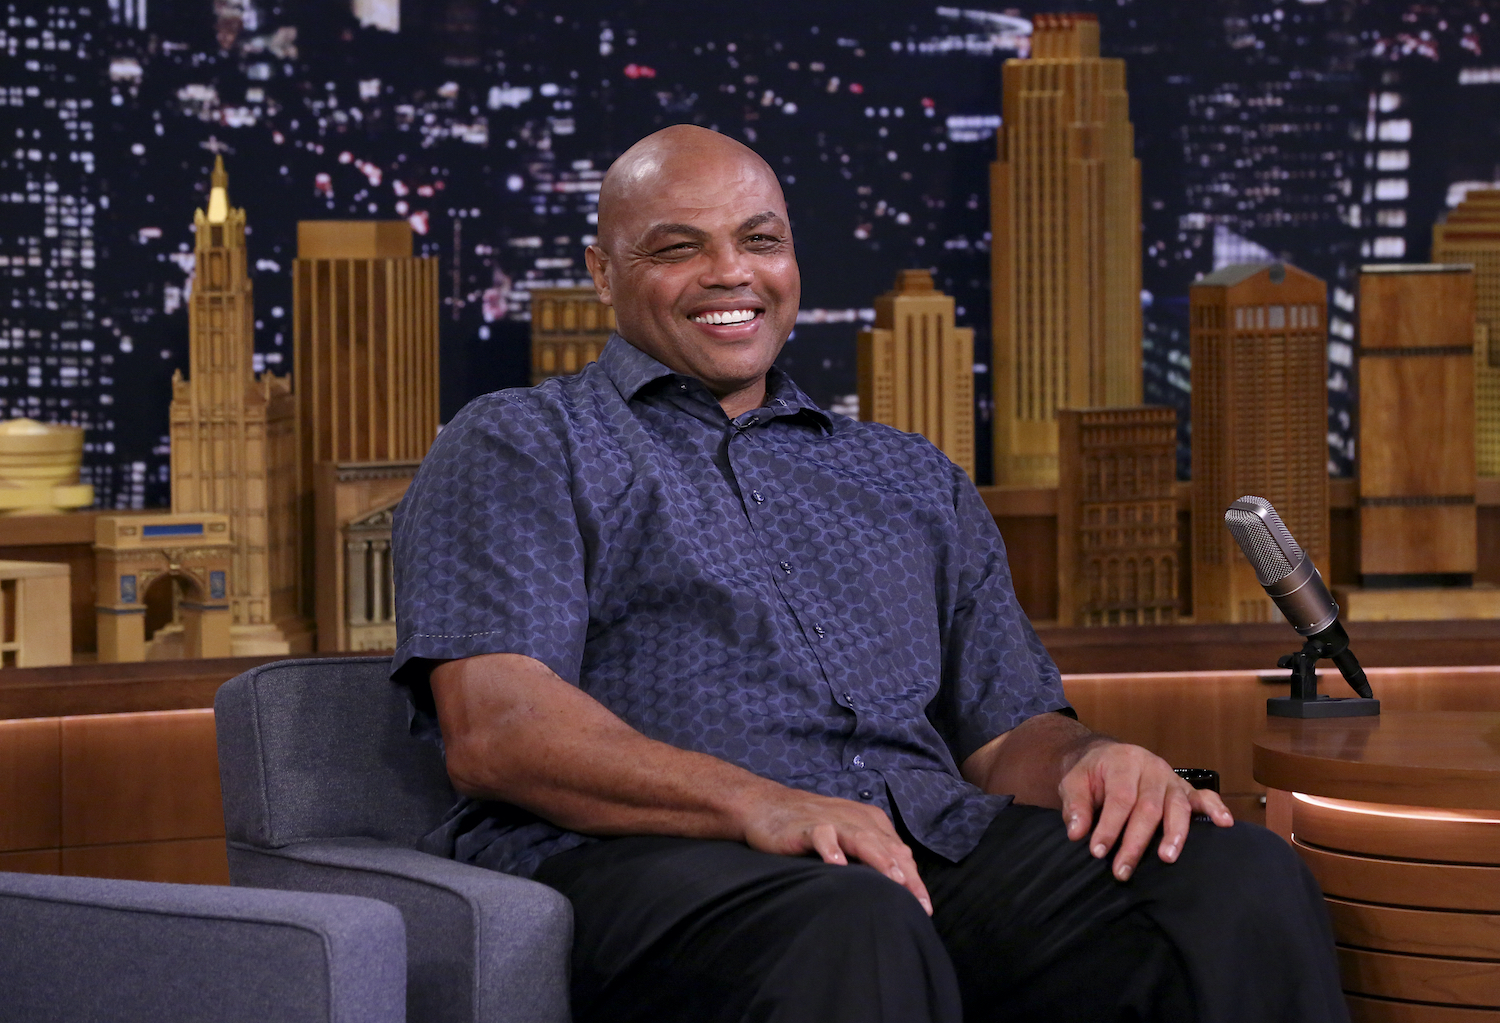 Former NBA player and current TNT broadcaster Charles Barkley during a TV interview.